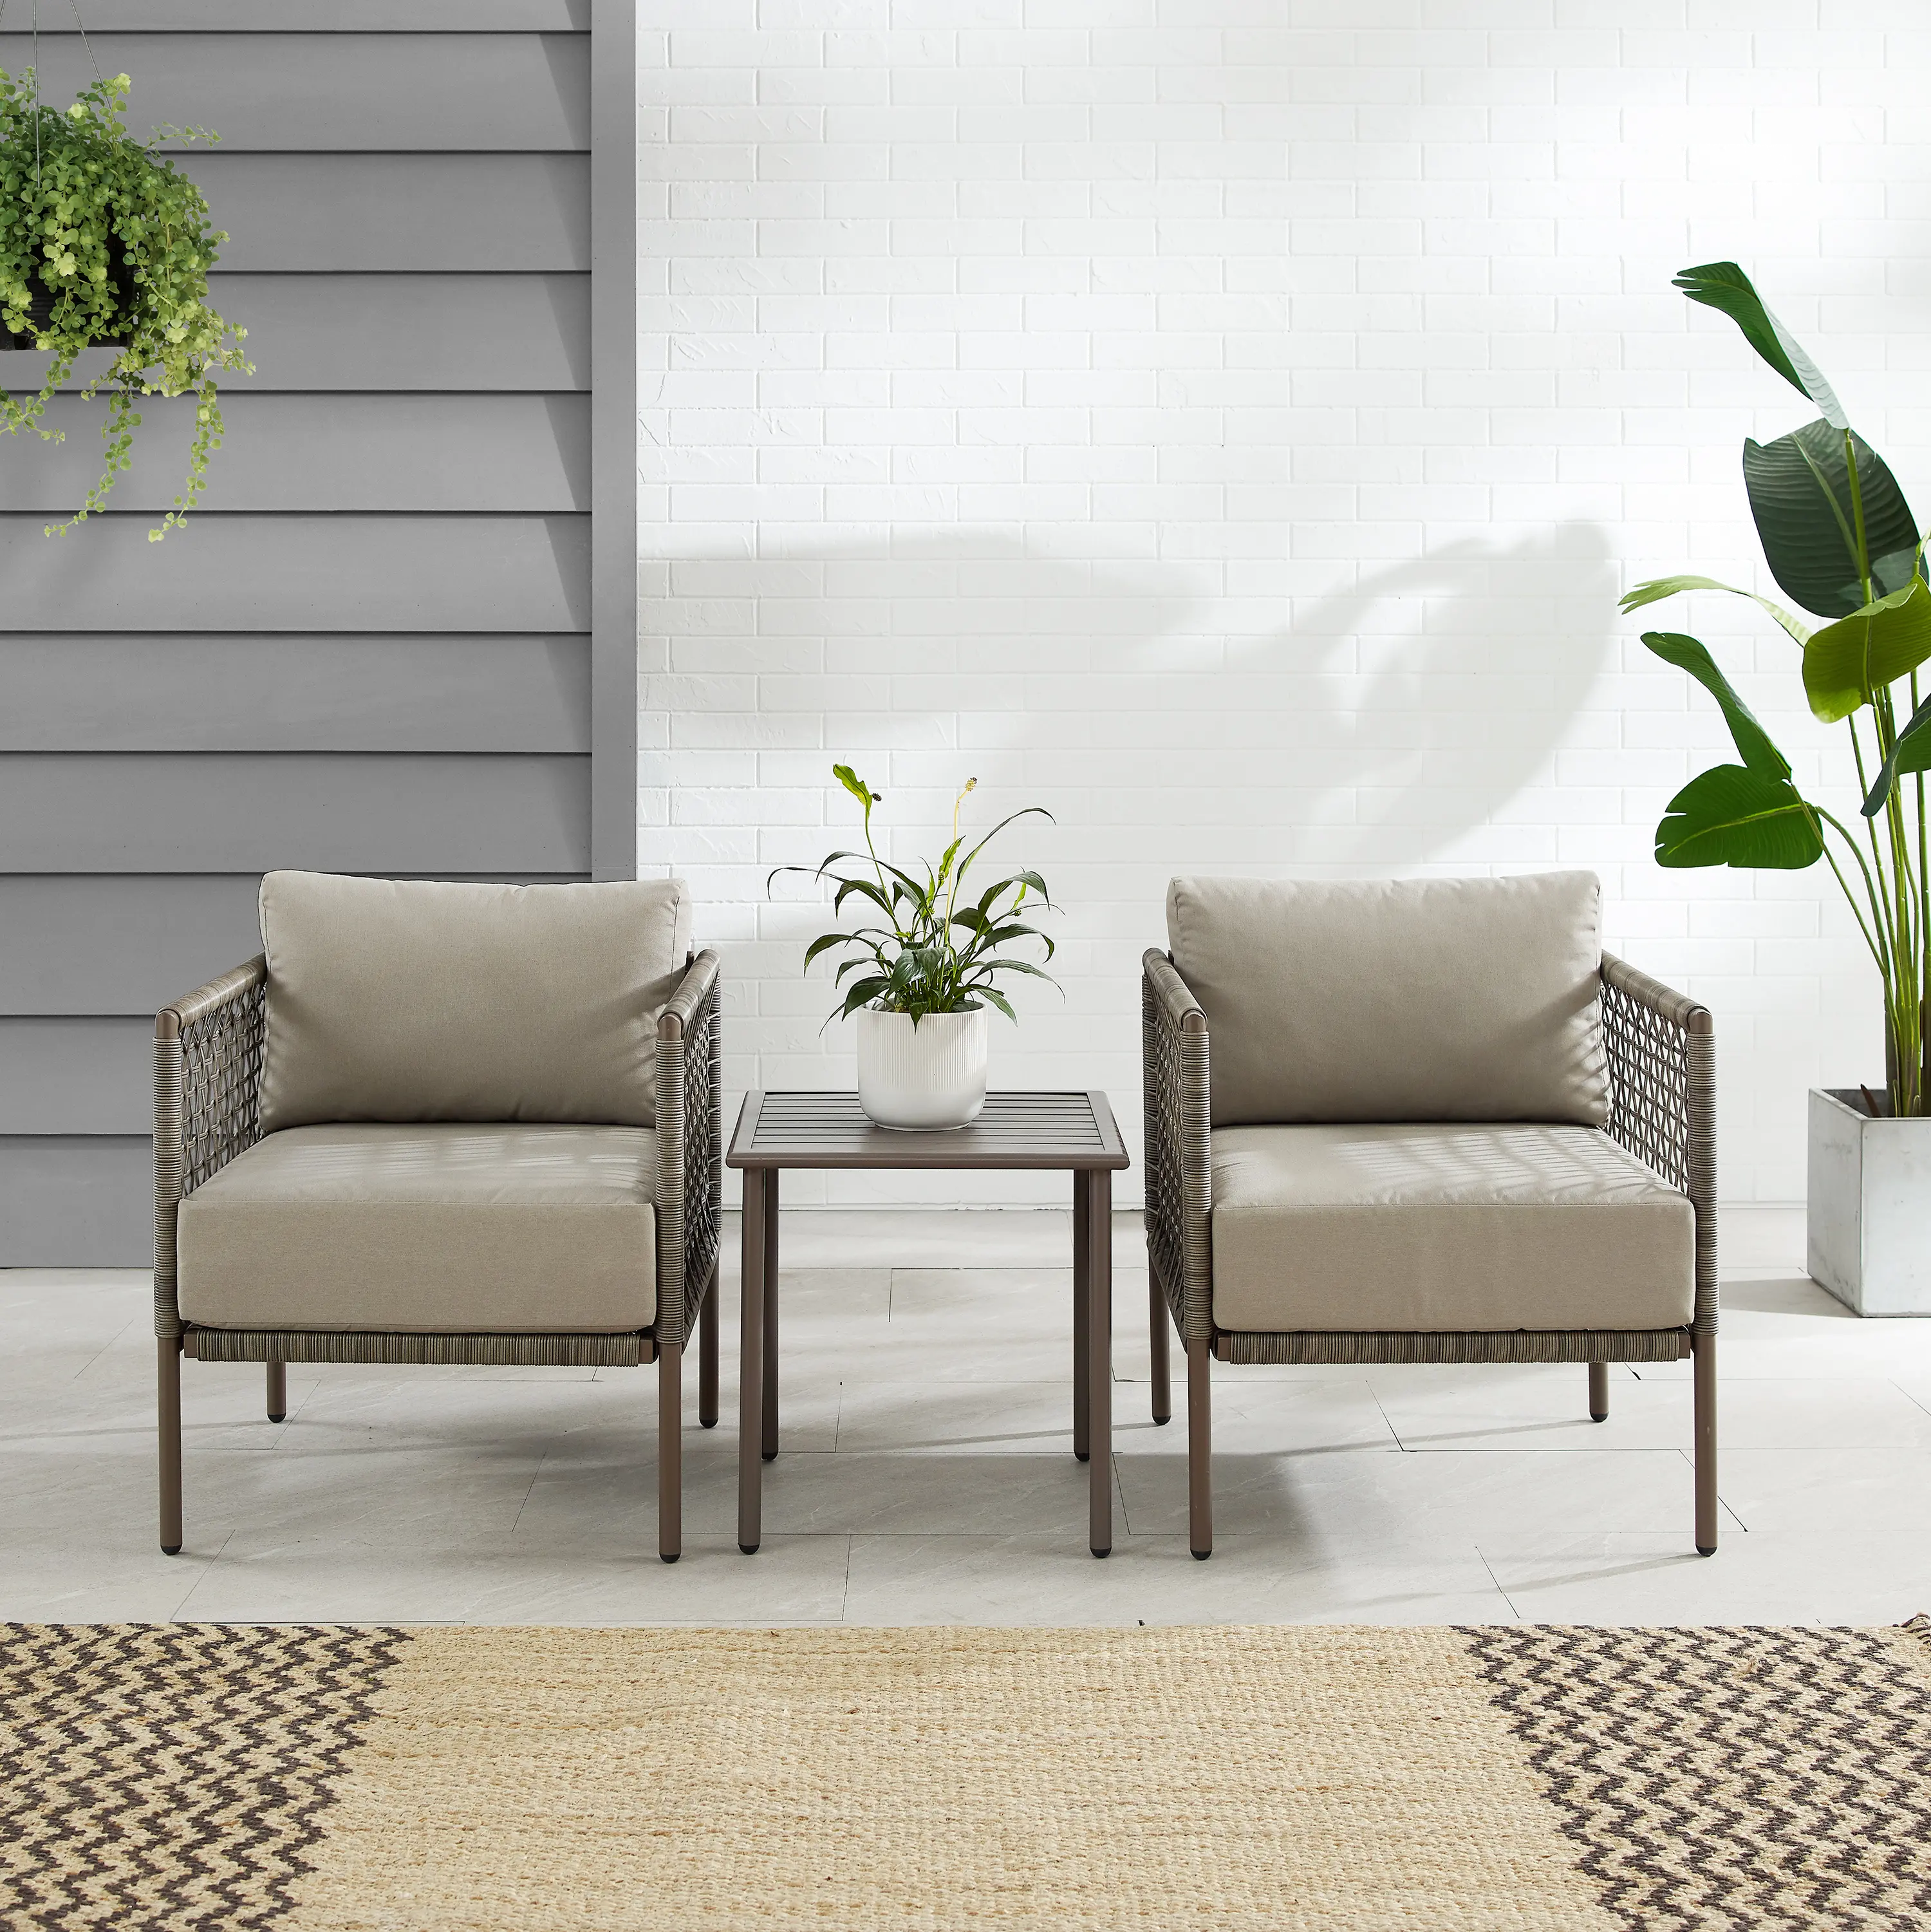 Cali Bay 3 pc Taupe Wicker and Metal Patio Armchair Set